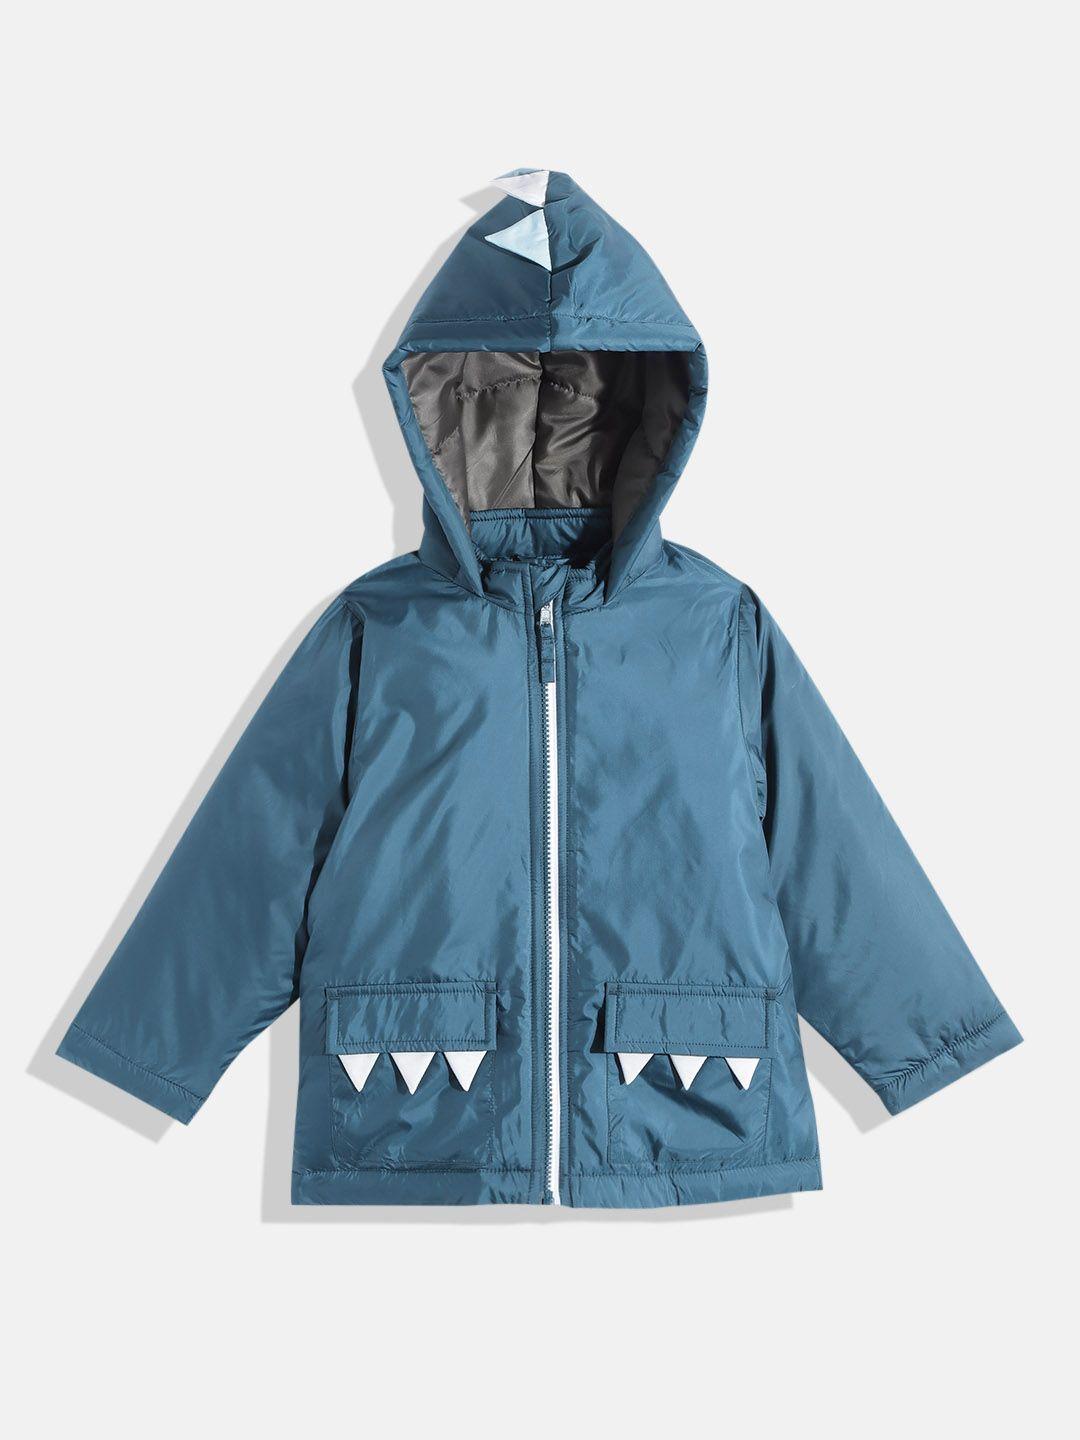 Killer Boys Teal Blue & White Solid Hooded Padded Jacket with Applique Oversized Pockets